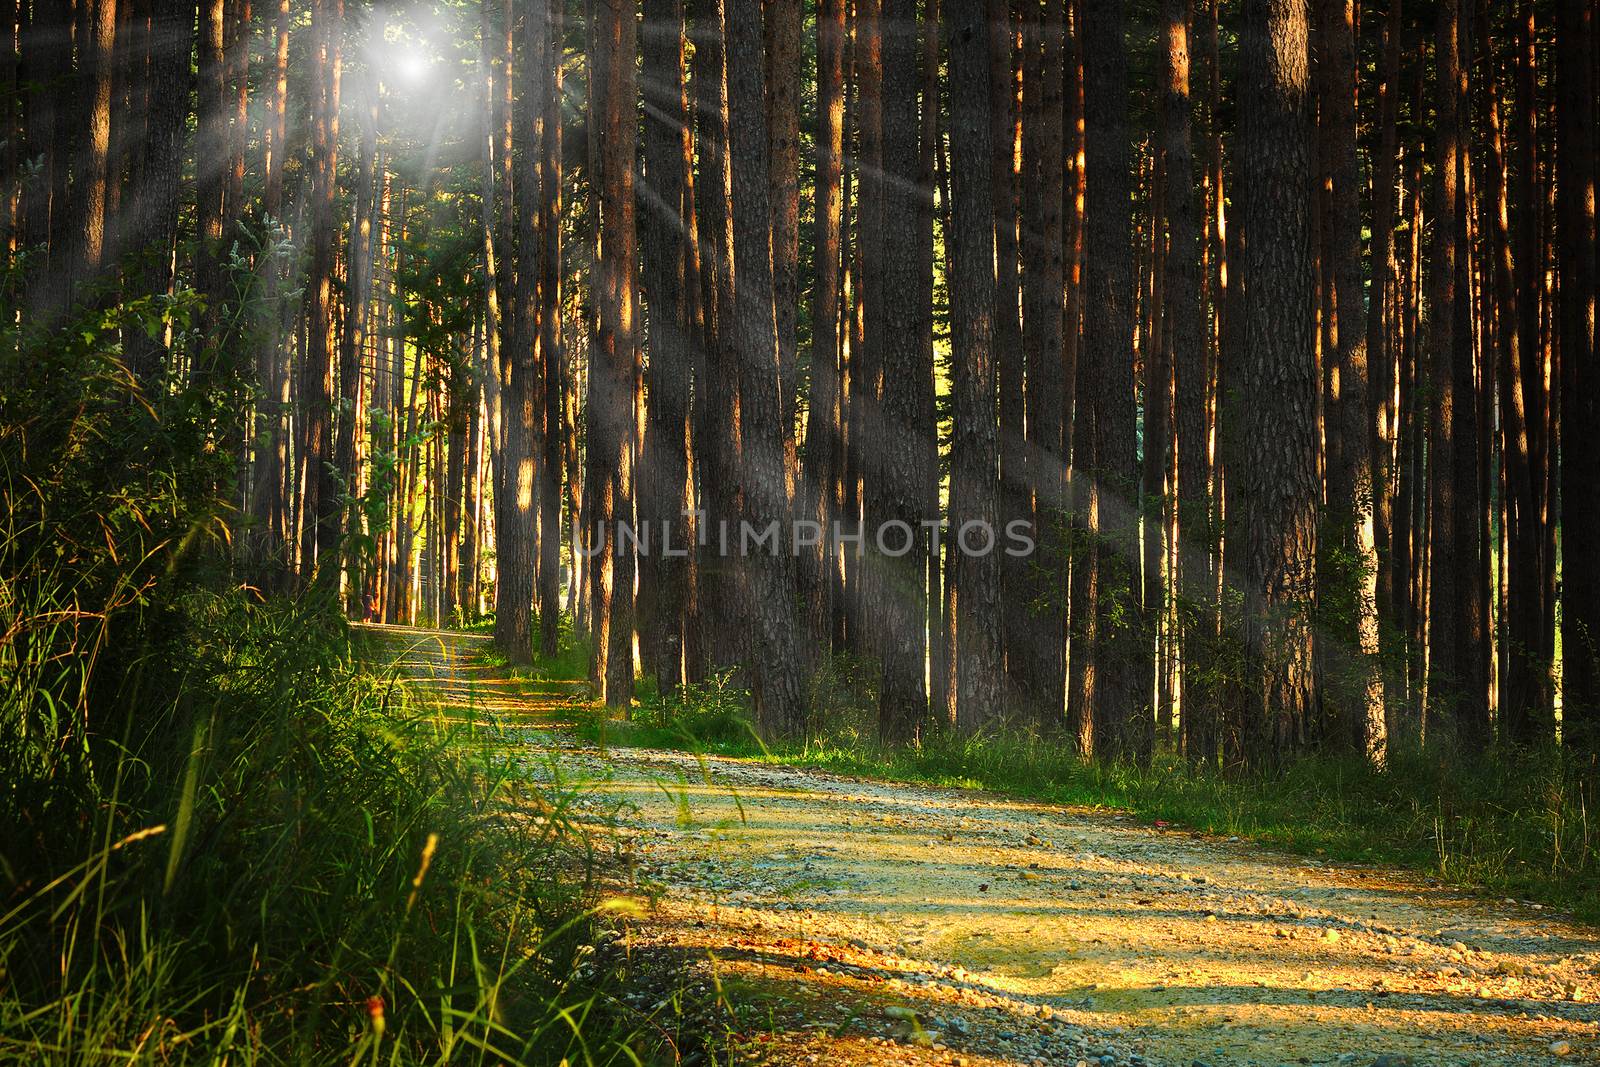 sunrays over footpath in the woods, pine forest at dawn